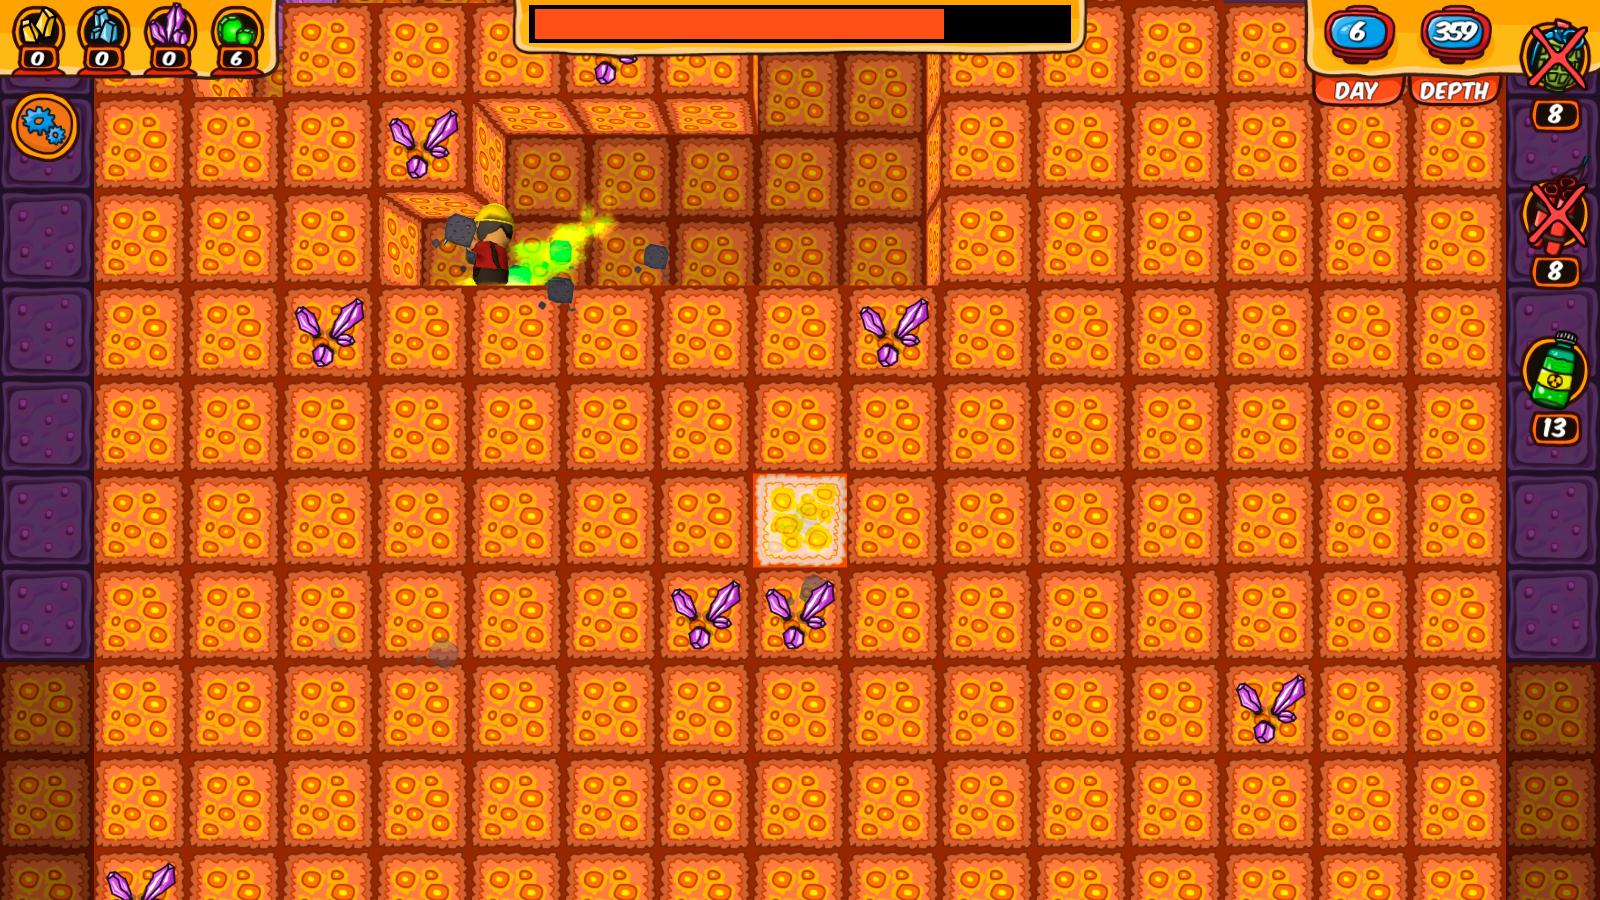 Screenshot №7 from game Mad Digger